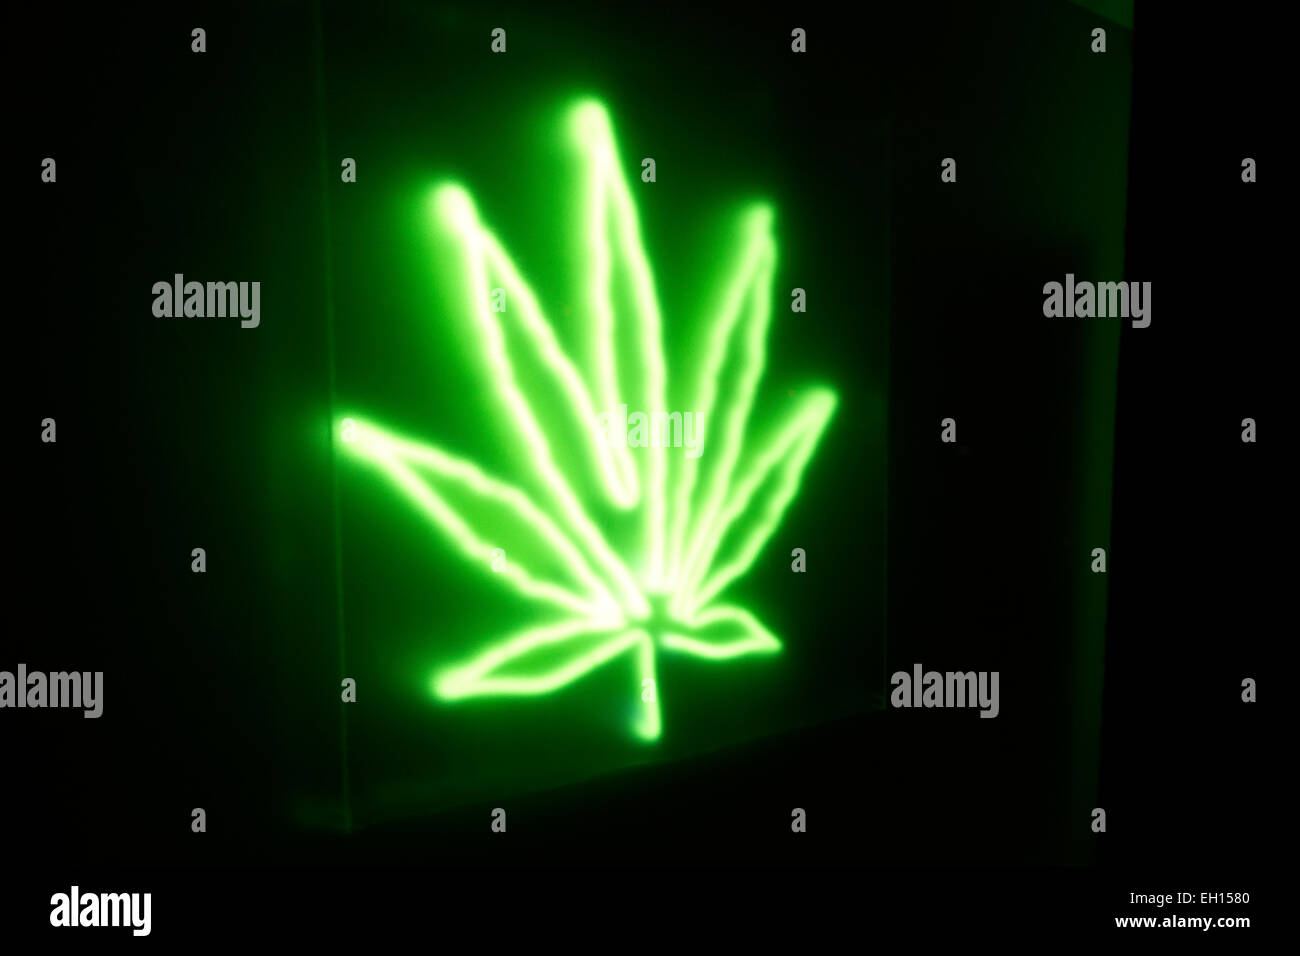 Neon cannabis leaf retail sign on urban storefront drug dispensary at night. Alternative medicine, chronic pain relief. Stock Photo